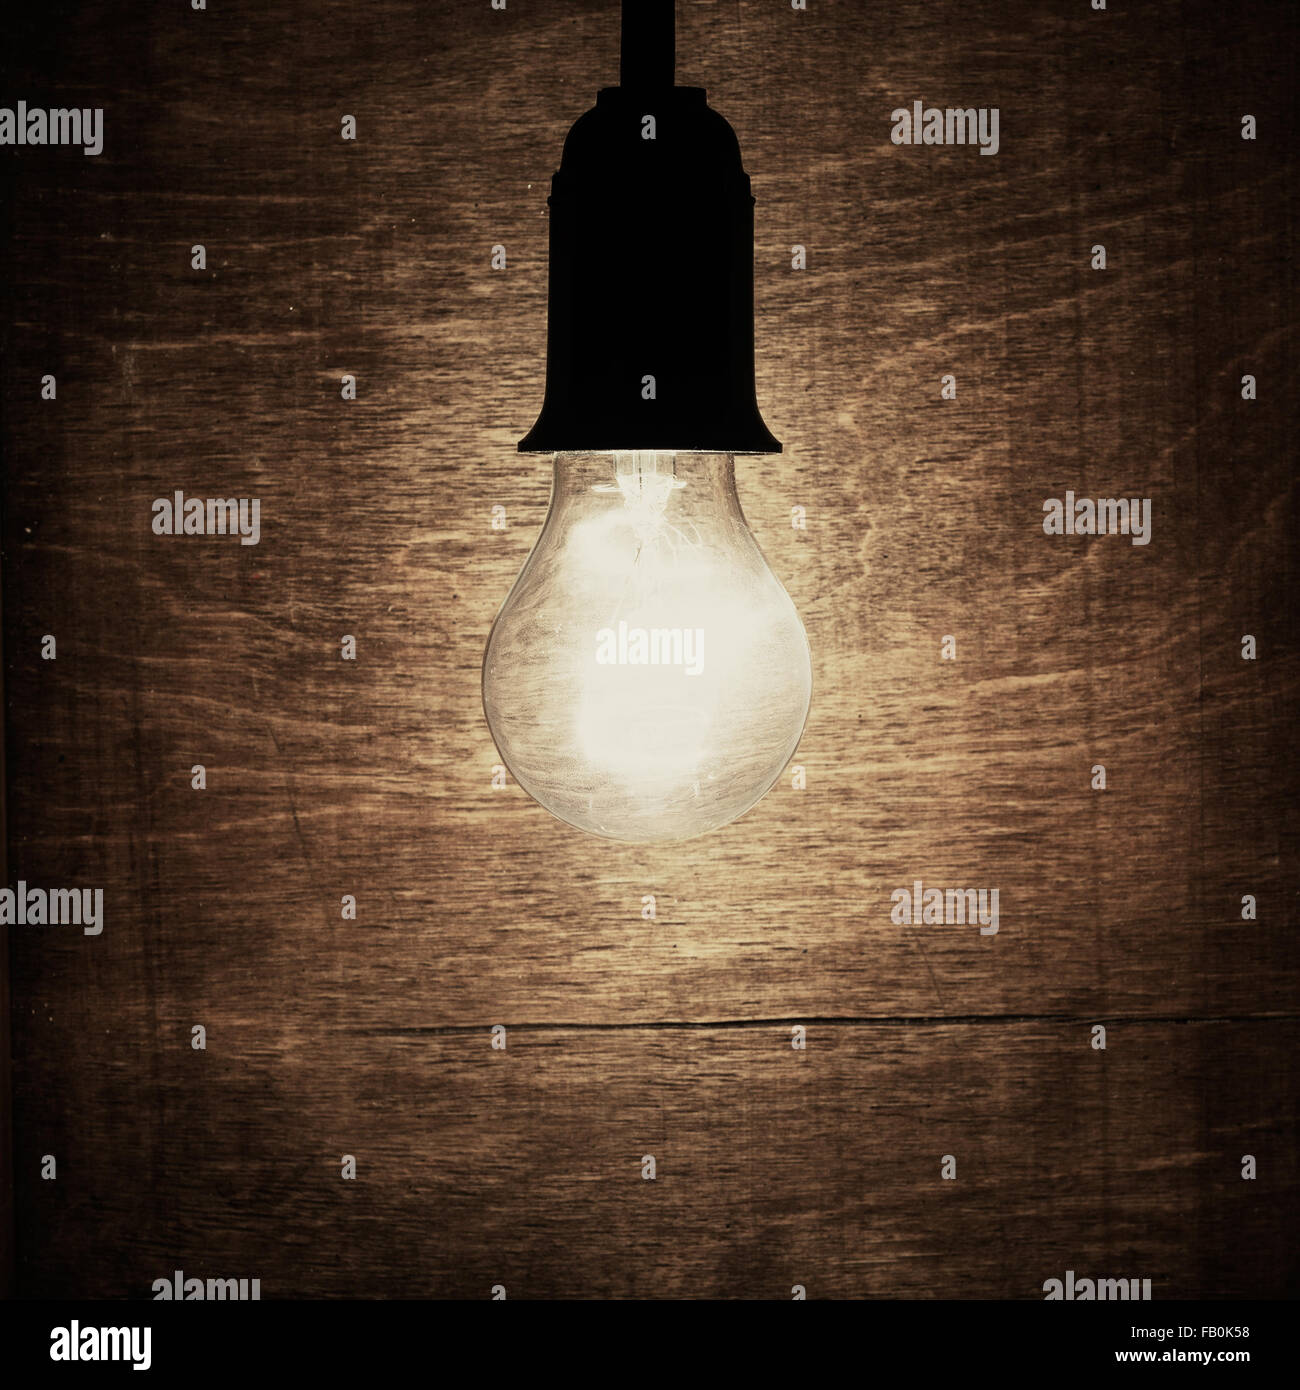 Light bulb against rustic wood background Stock Photo